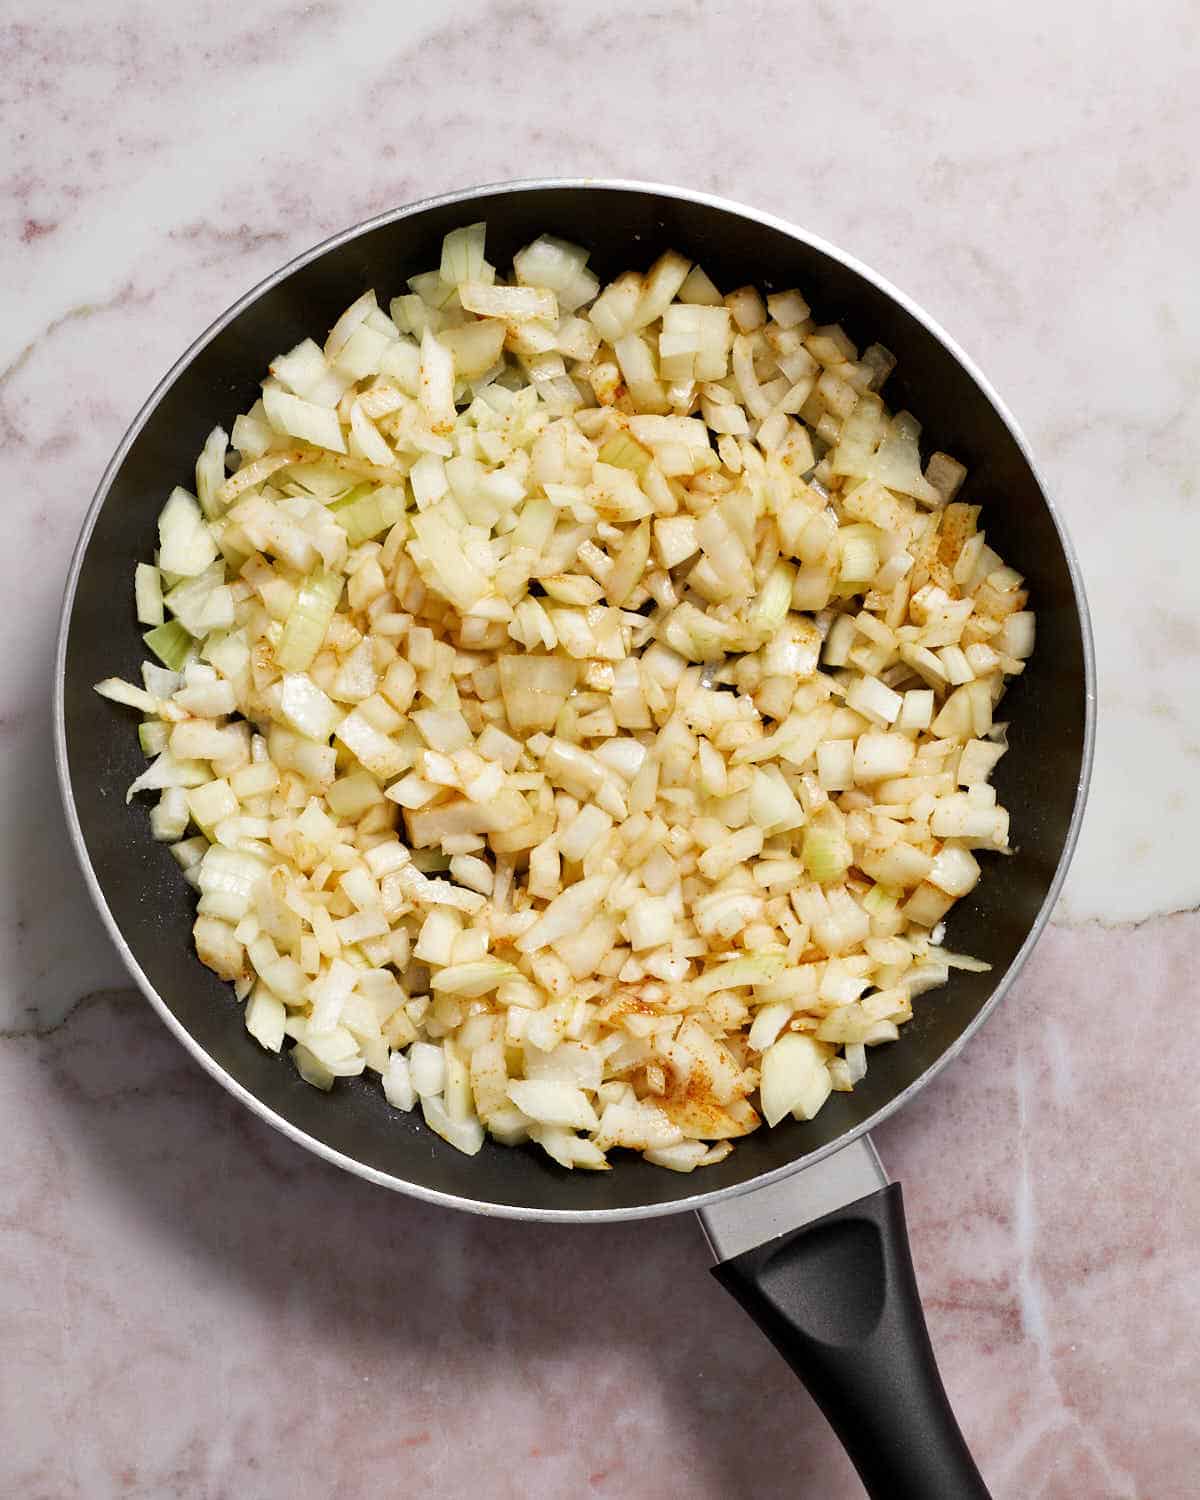 Chopped onions in a skillet.